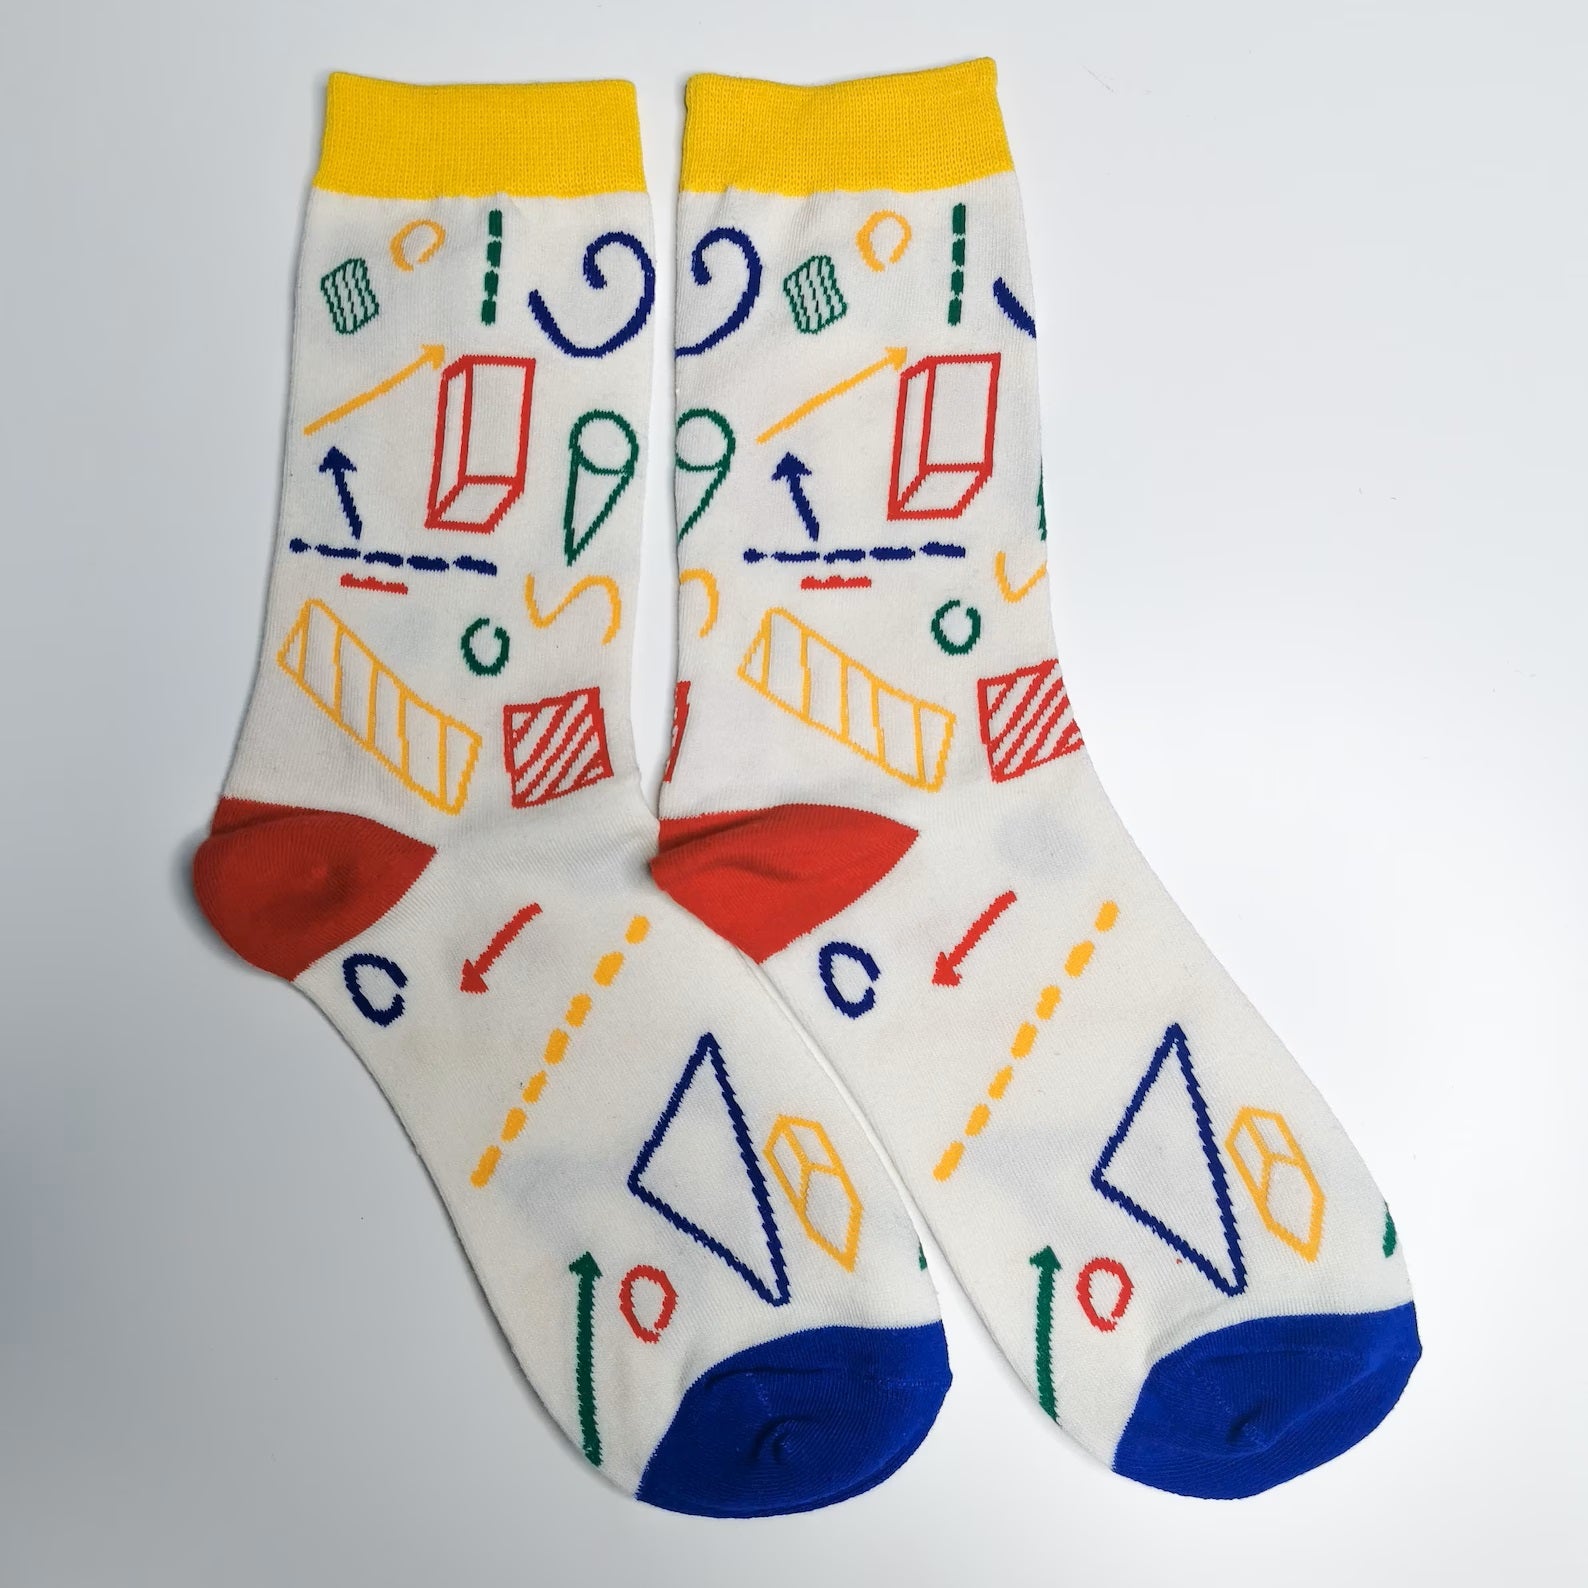 Geometry Patterned Socks from the Sock Panda (Adult Large)